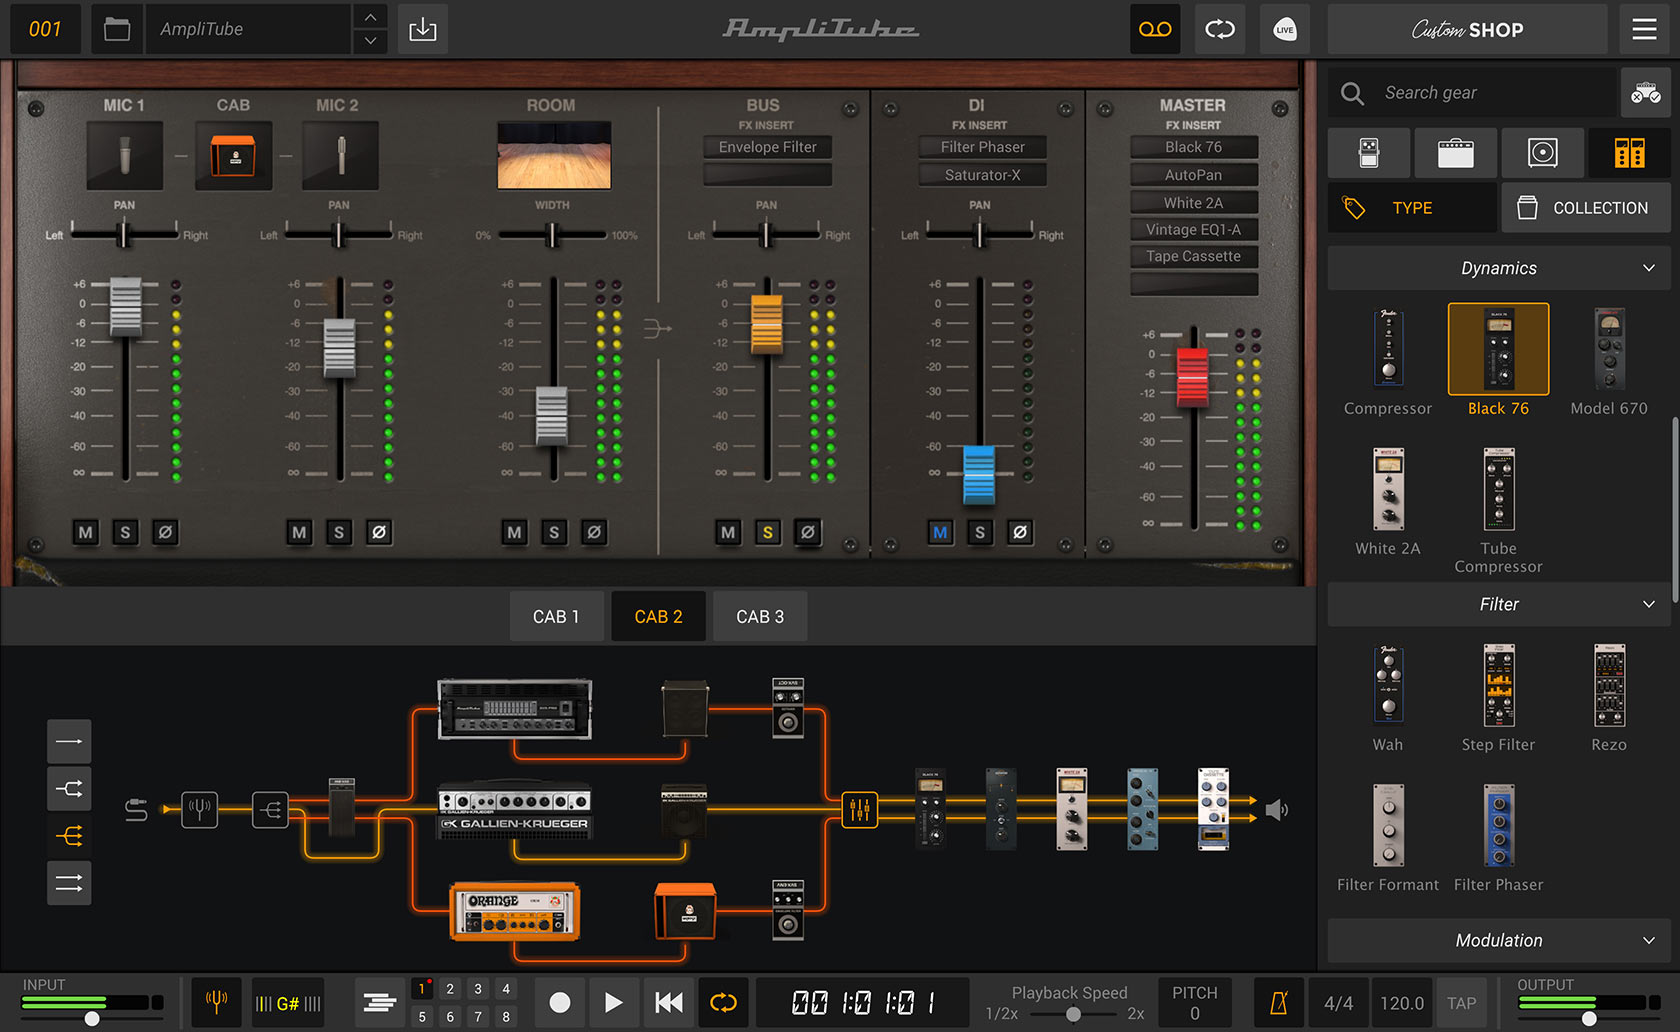 download the new AmpliTube 5.6.0